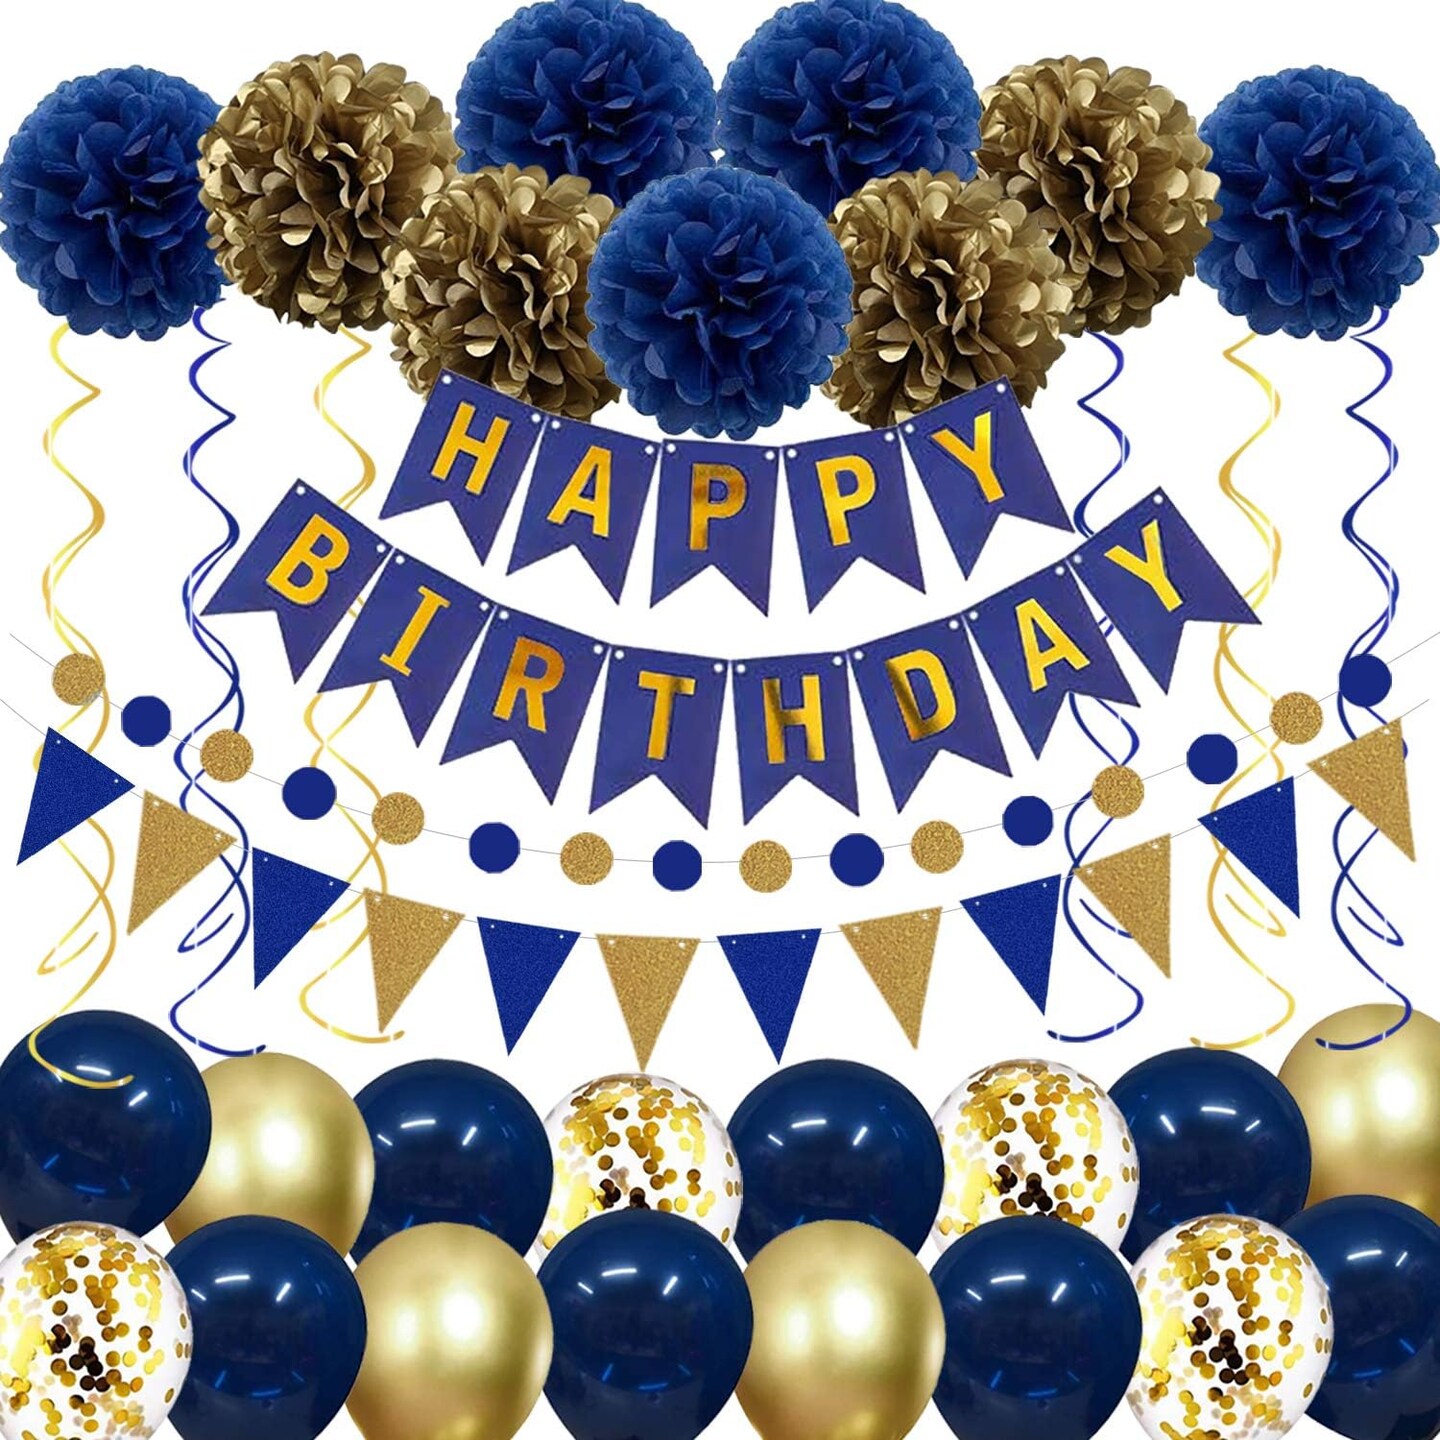 Navy Blue Gold Birthday Decorations, Birthday Party Supplies for Men Women Boys Girls with HAPPY BIRTHDAY Banner, Tissue Paper Flowers Pom Pom, Pennant and Circle Dot String, Latex Confetti